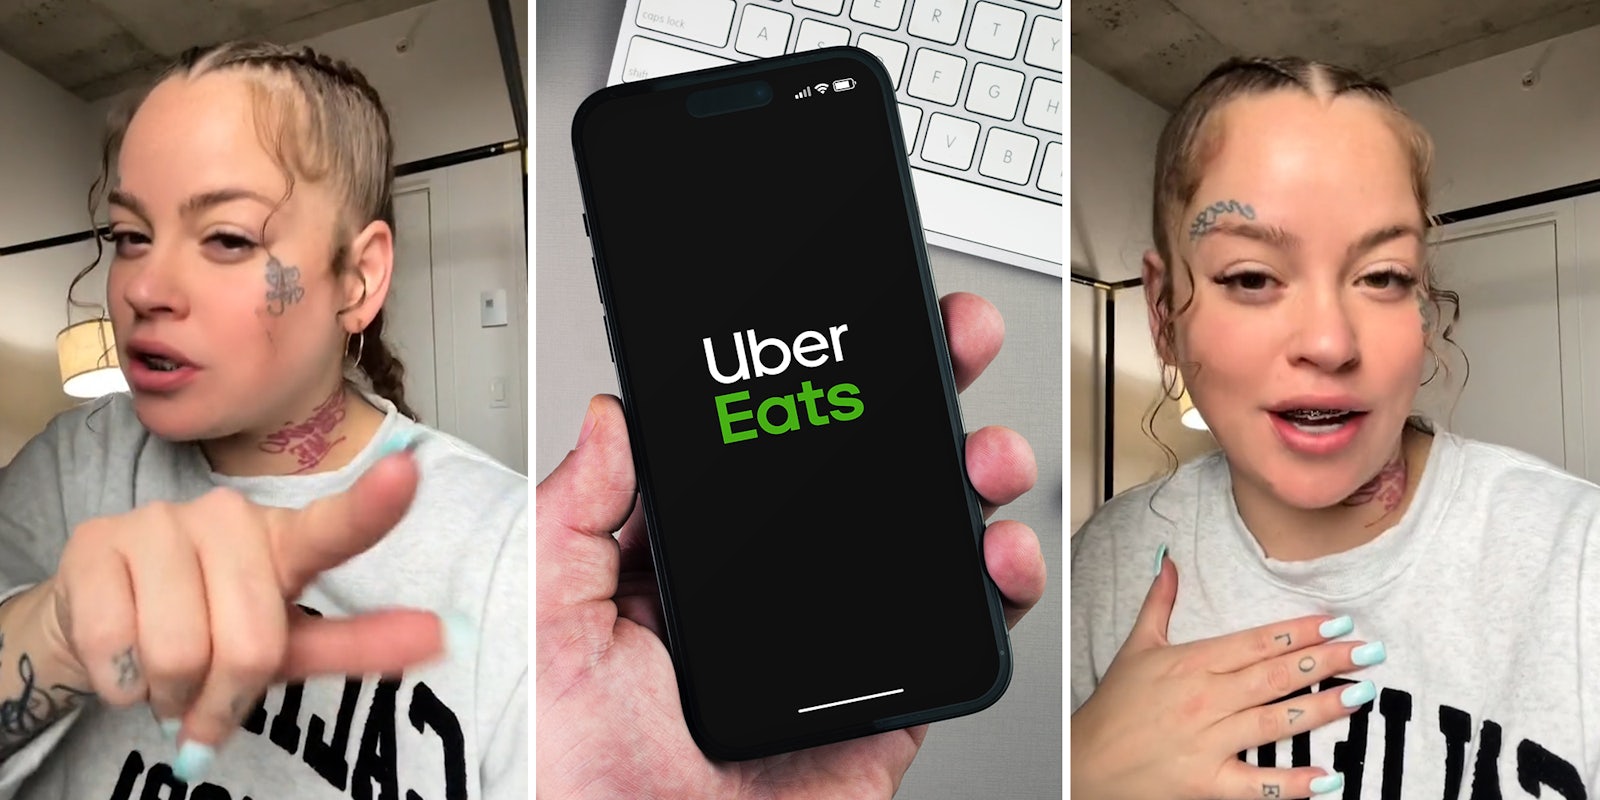 Uber Eats customer gets inedible item. They won’t refund her